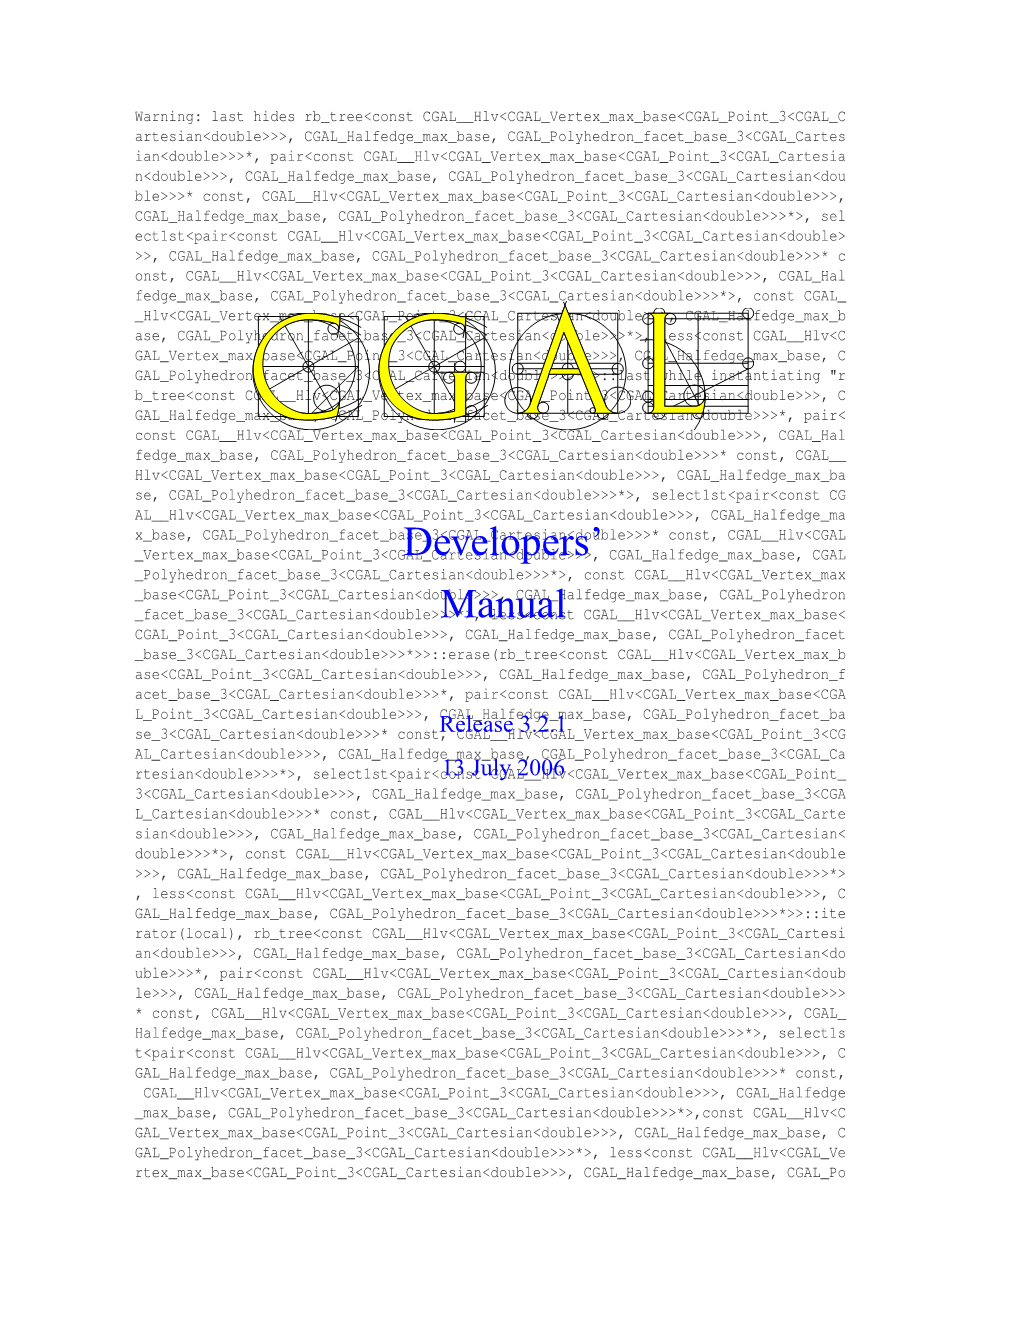 CGAL Manuals and a Top-Level Driver Script to Run LATEX and the Latex to Html Converter Consistently in the Manual ﬁle Structure of CGAL Manuals